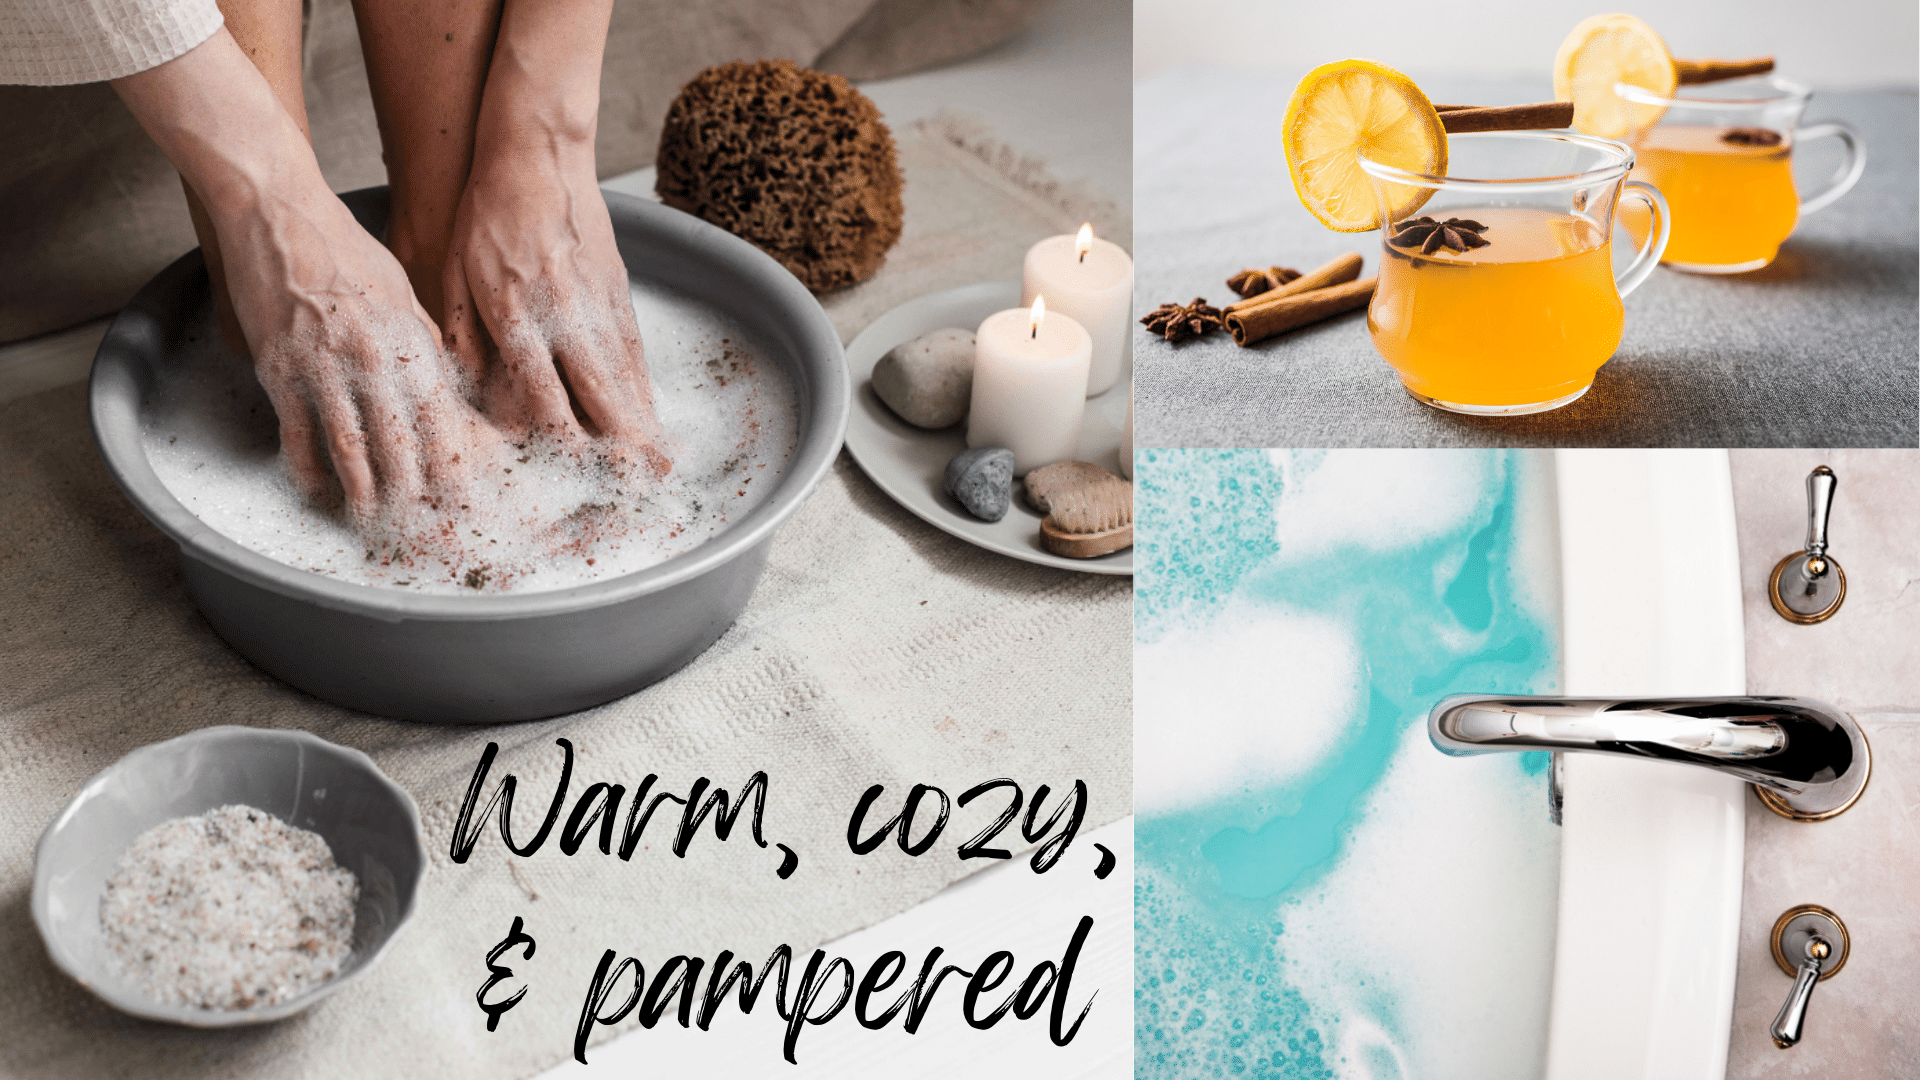 ways to stay warm, cozy, and pampered